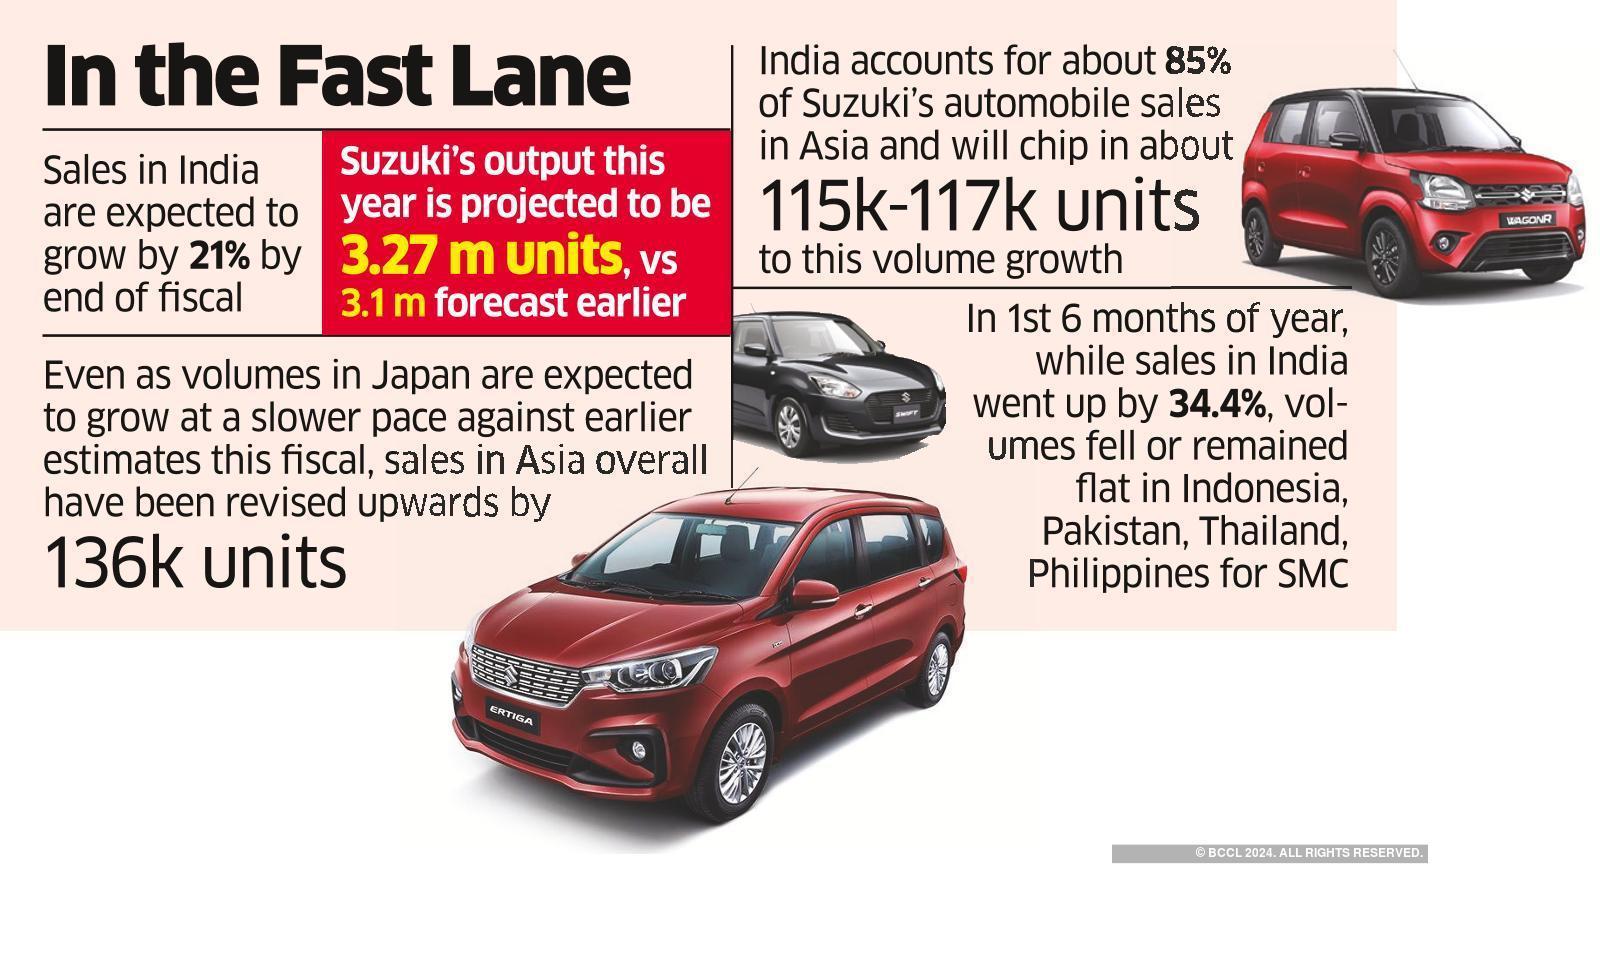 Maruti Suzuki expects sales of vehicles with auto gear shift to accelerate  - The Economic Times